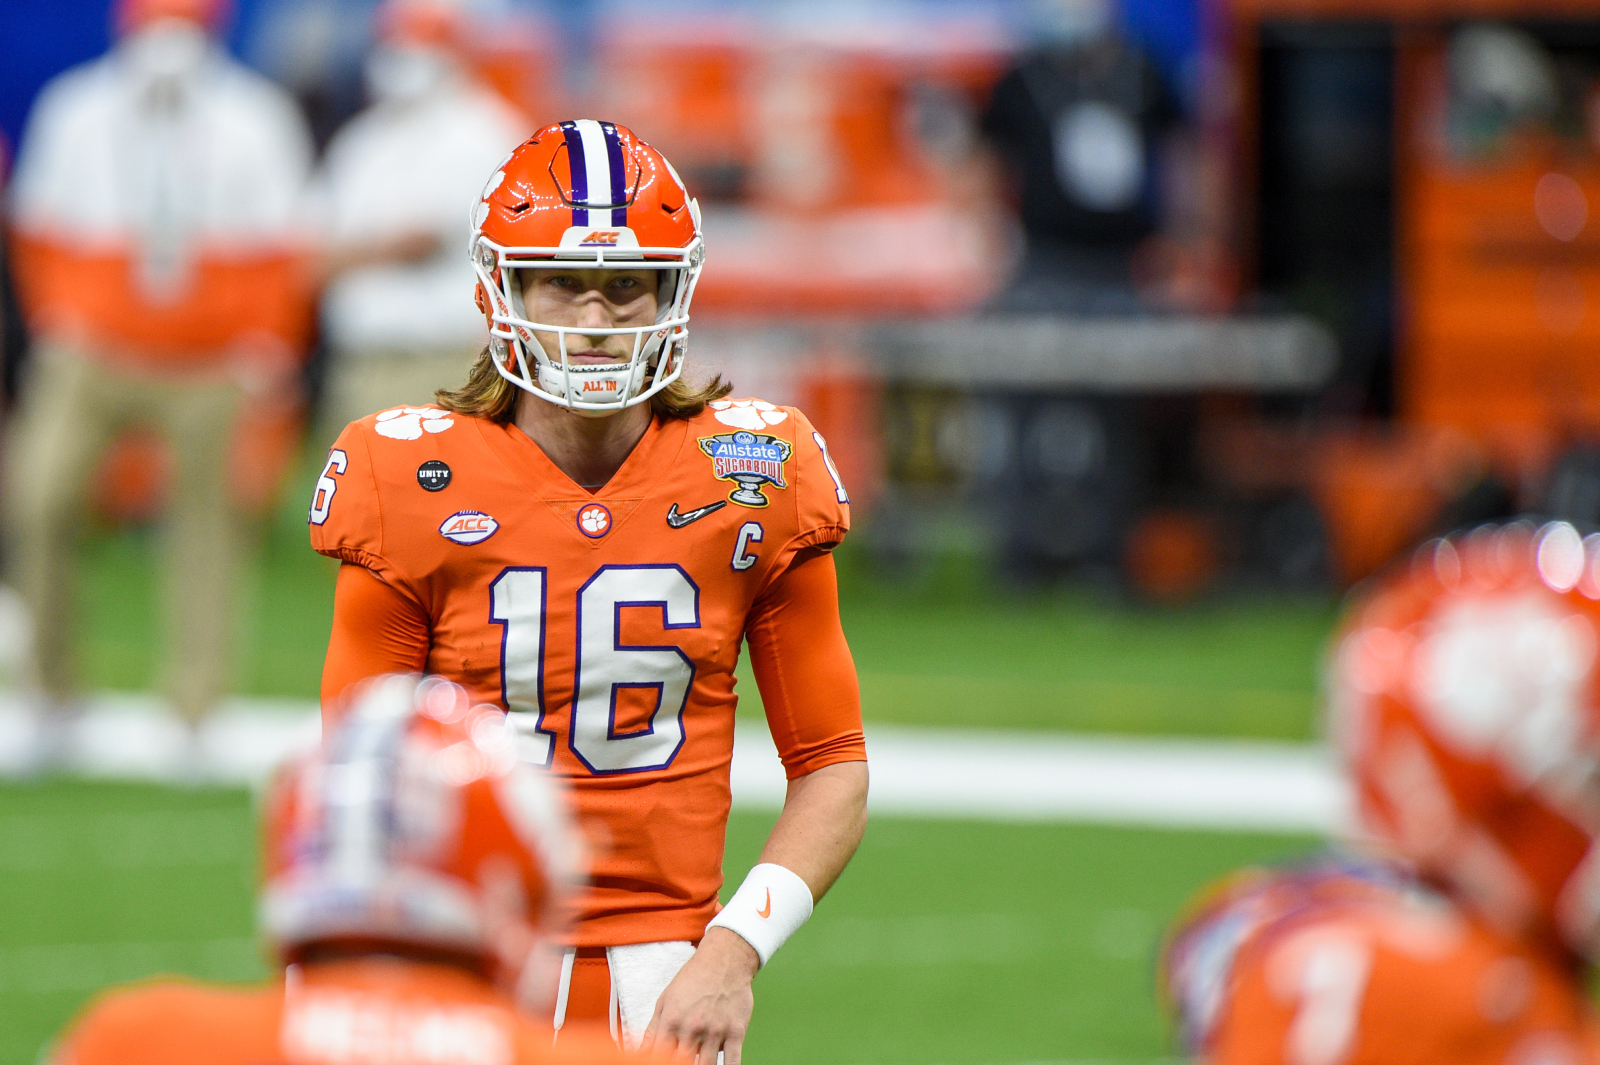 Trevor Lawrence should be the quarterback of the Jacksonville Jaguars in 2021. It appears they are already making plans for his future, too.